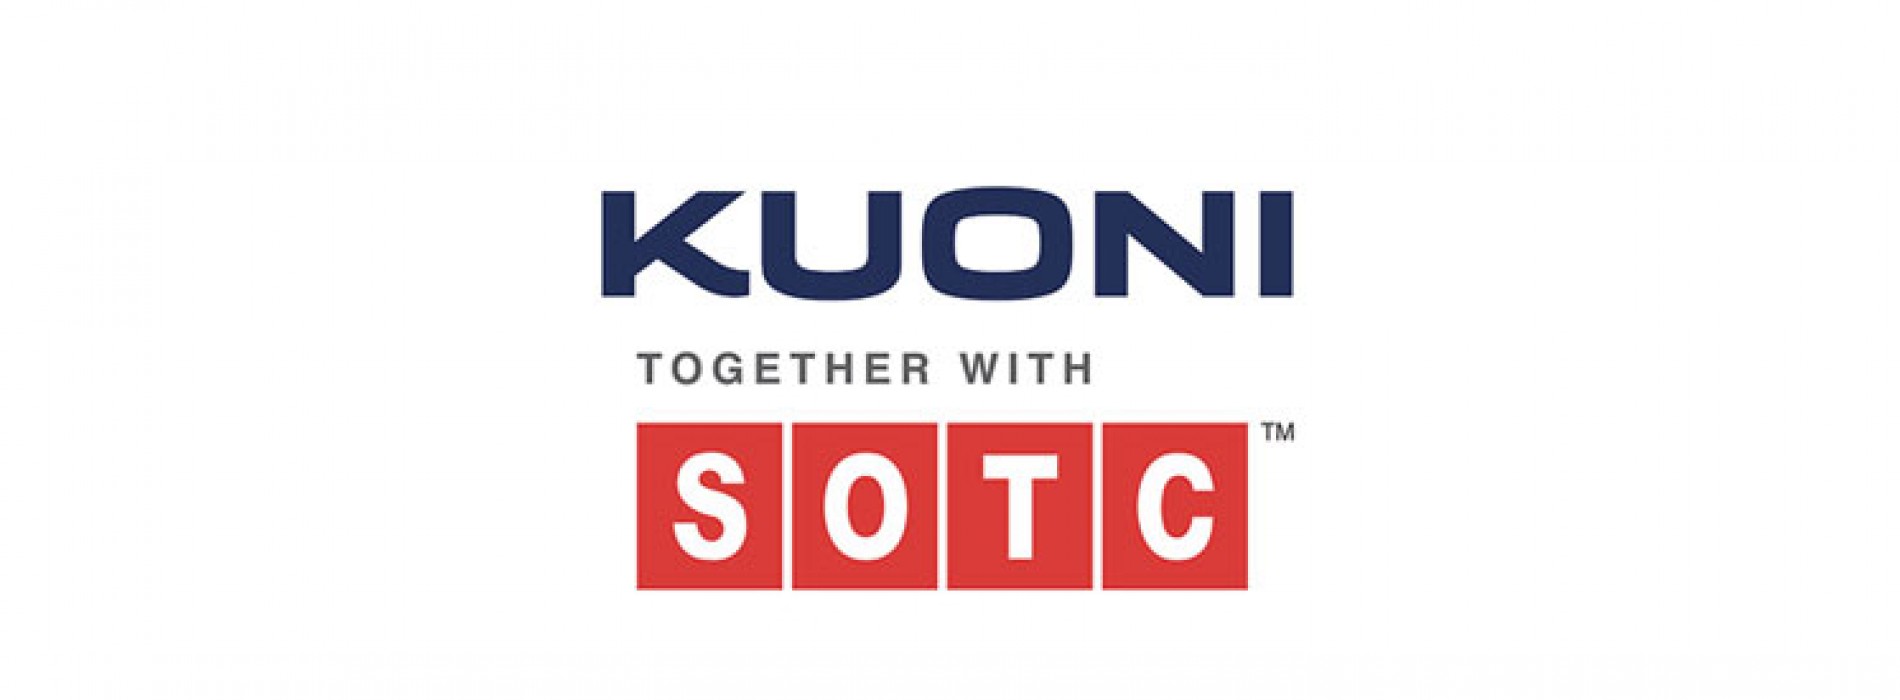 KUONI-SOTC offers attractive payment and investment plans for your holiday